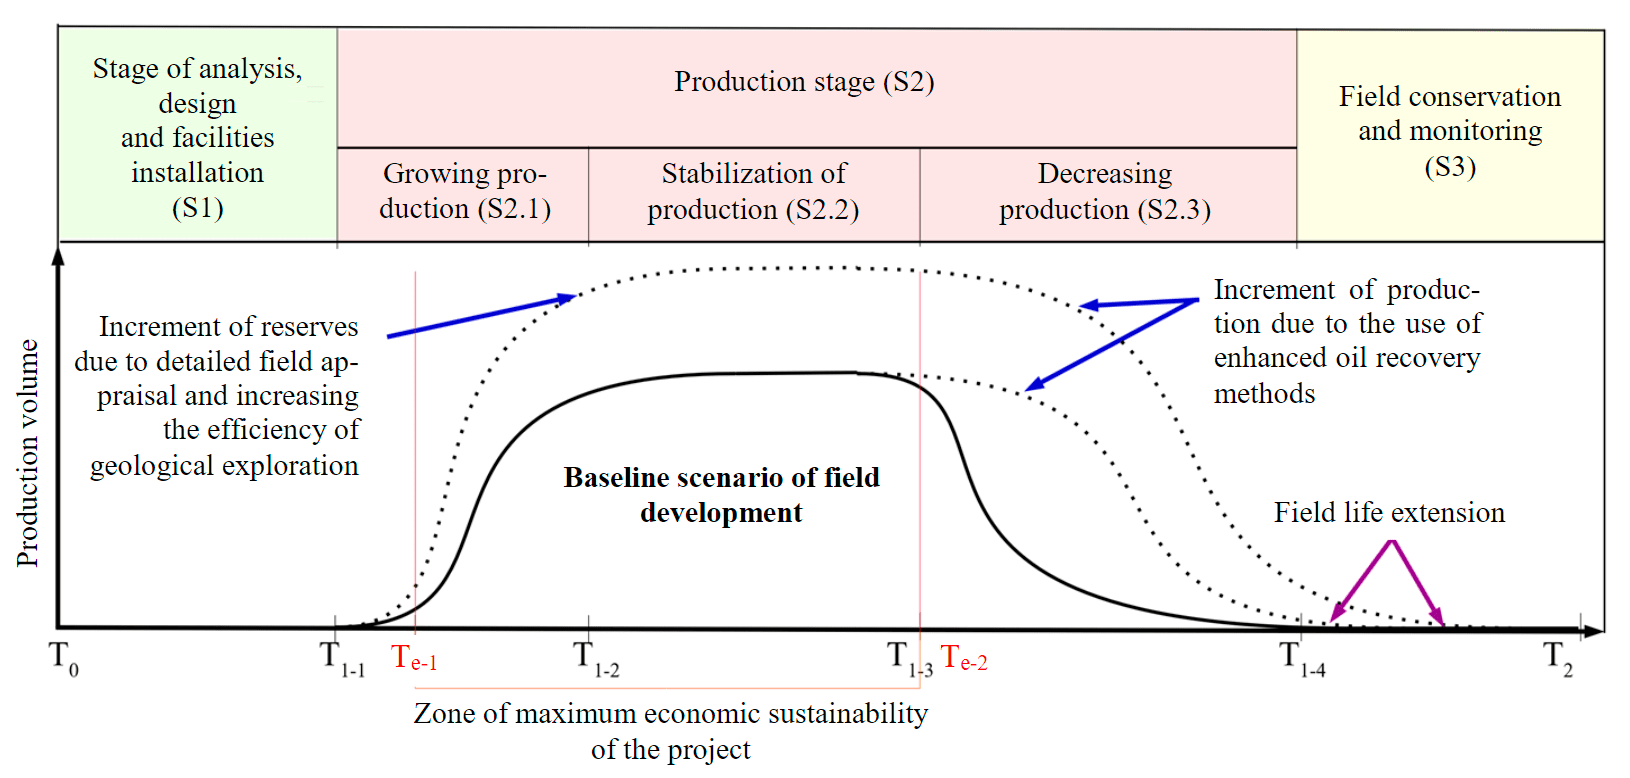 Fig.4. Life cycle stages of an oil and gas project